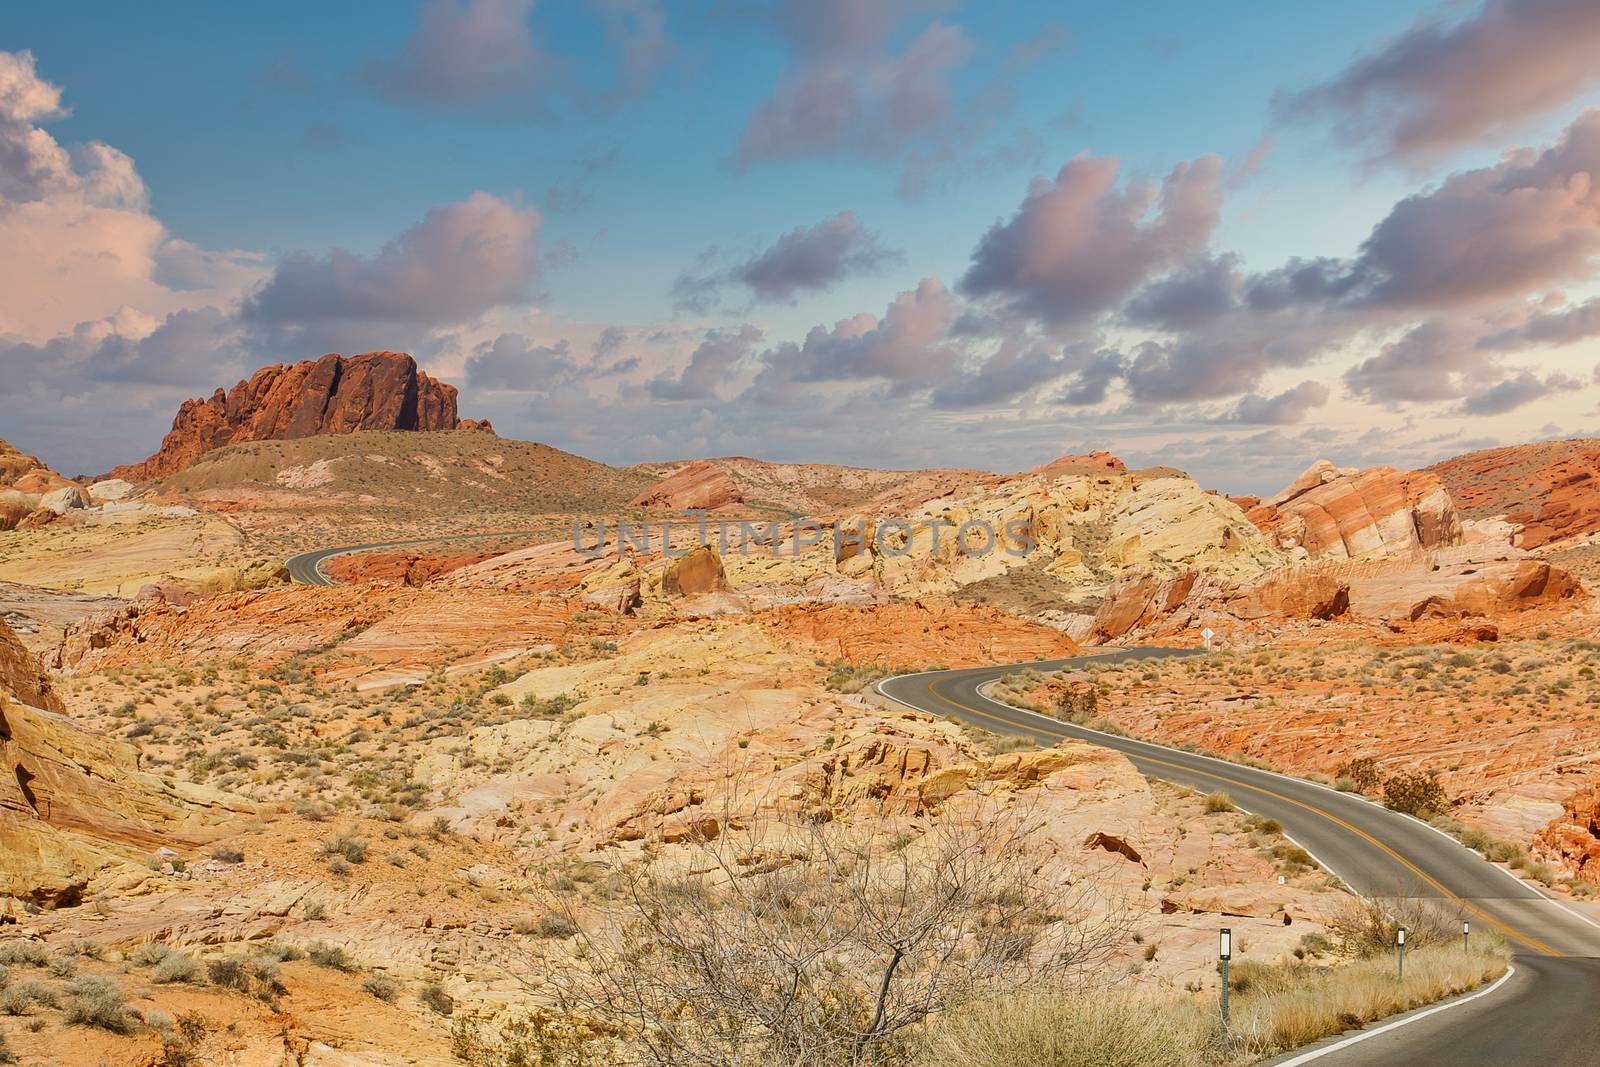 Road Curving Through Red Rock Desert at Dusk by dbvirago